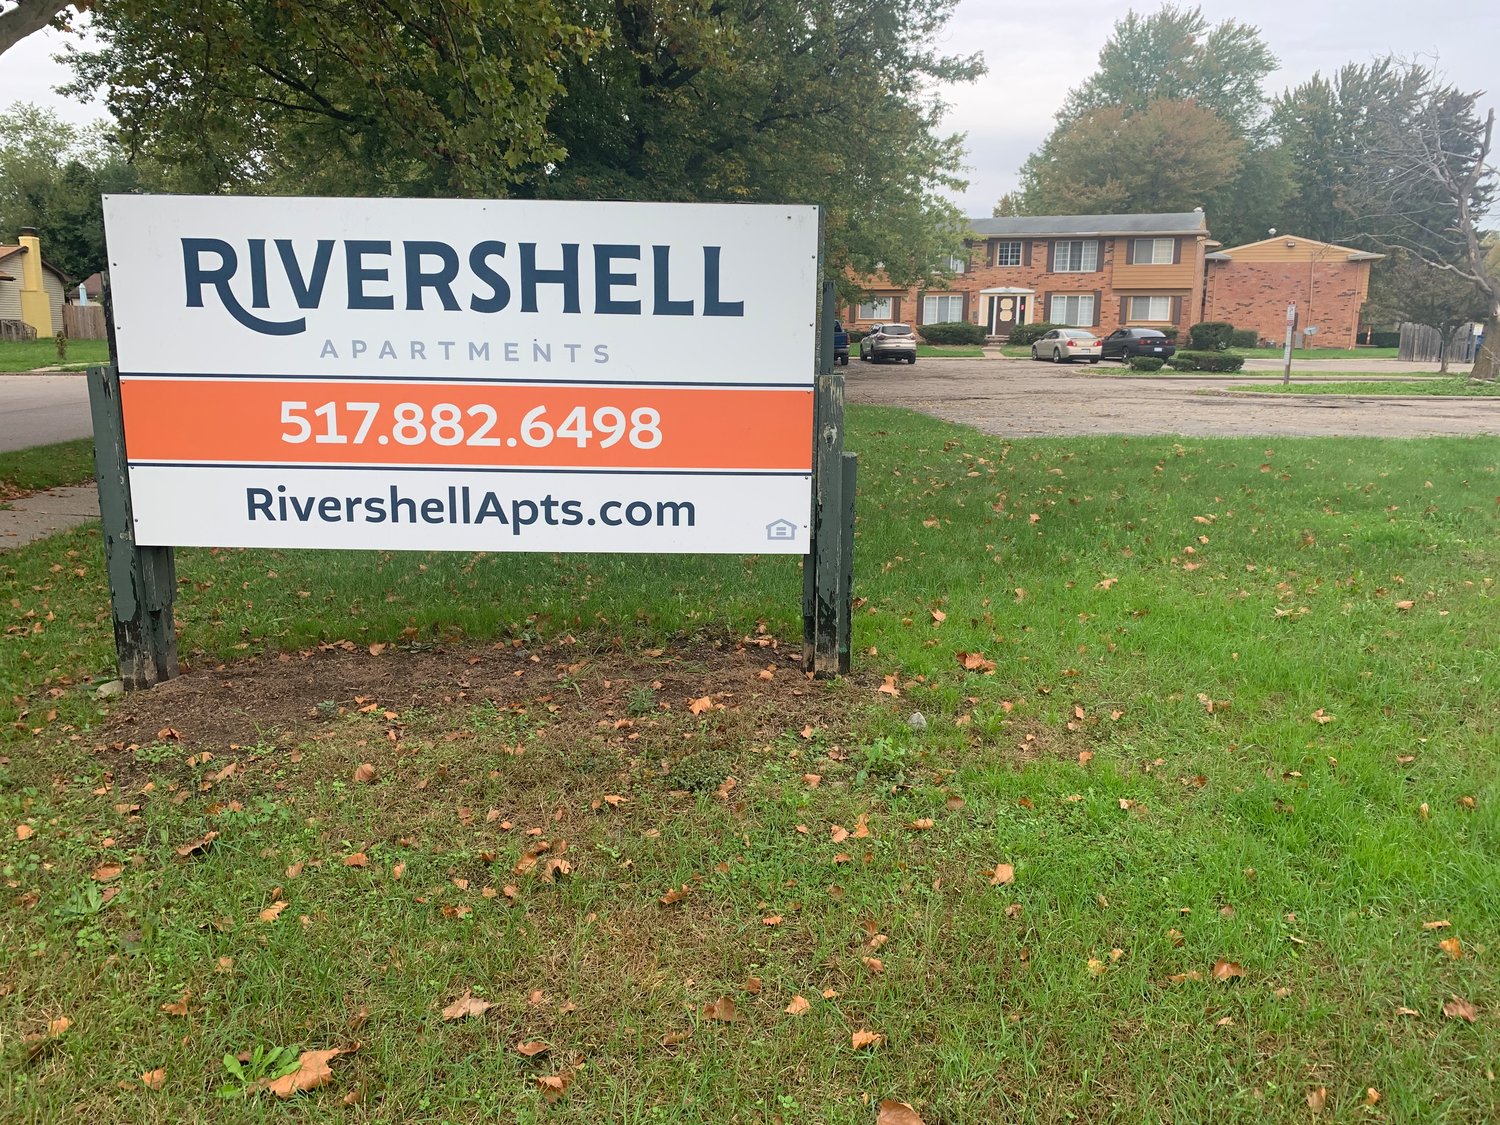 The city ordered repairs be made at Rivershell Apartments by Friday, Oct. 22. Management missed the deadline.